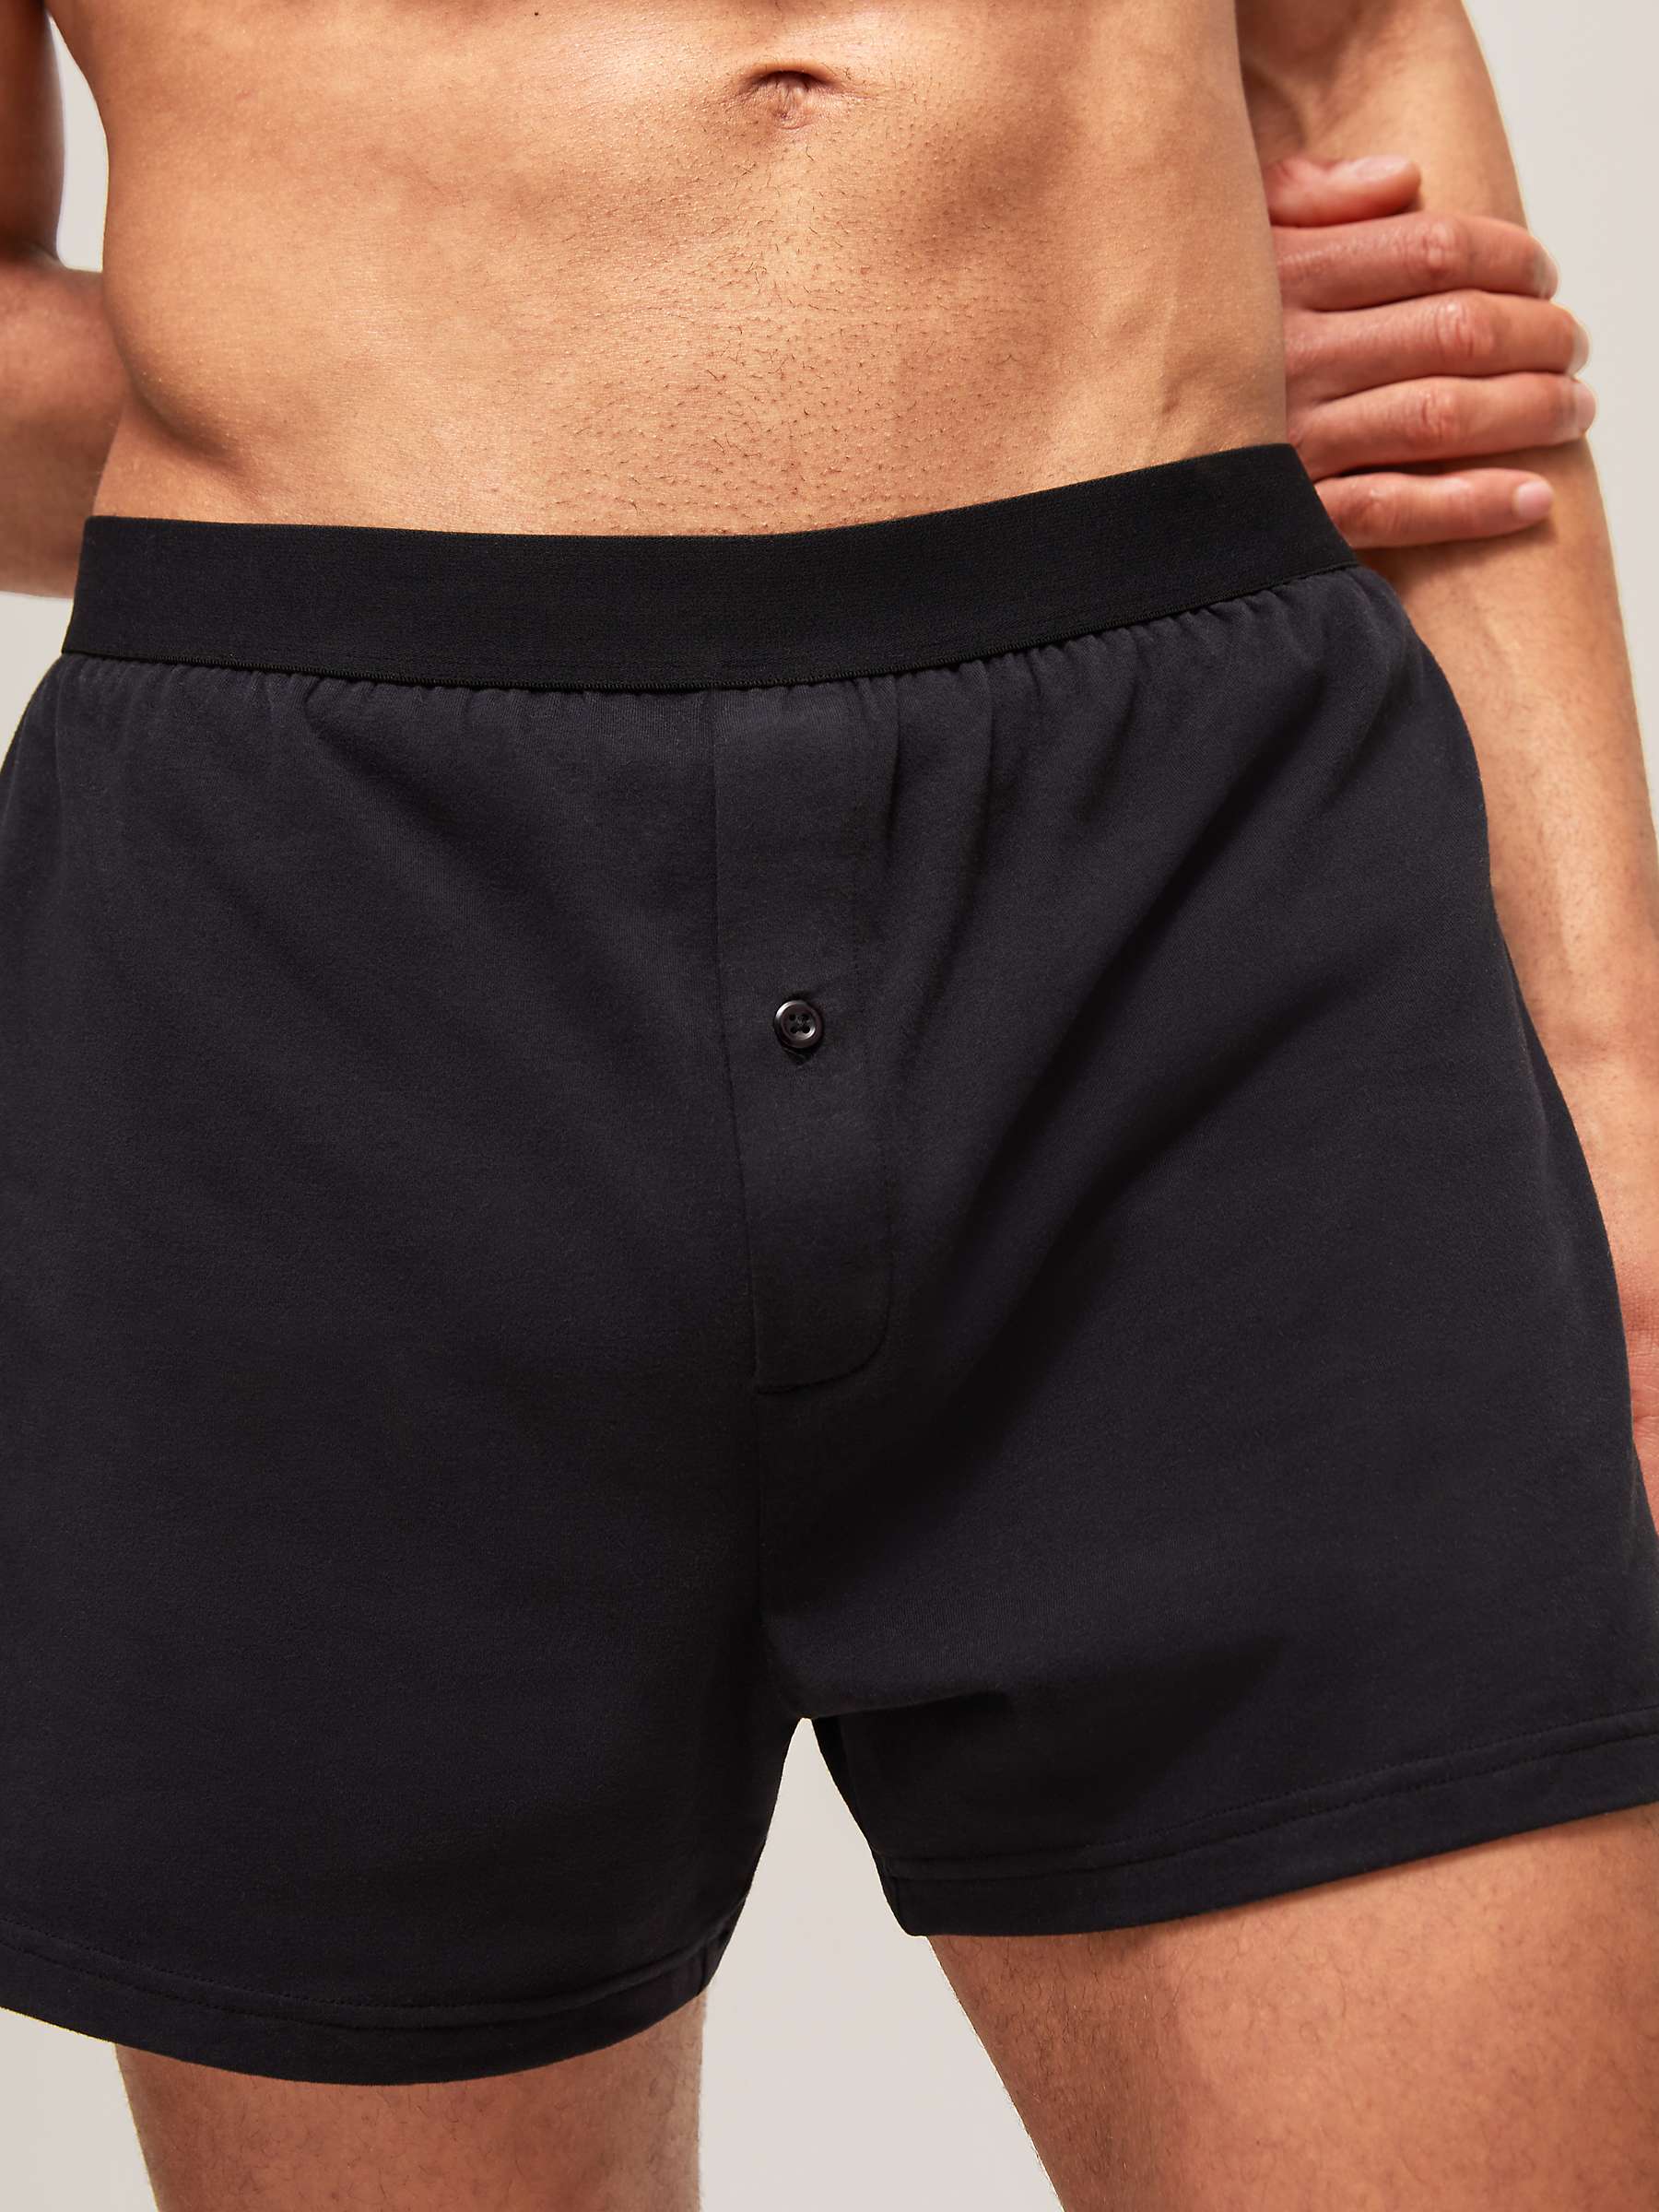 Buy John Lewis ANYDAY Jersey Boxers, Pack of 3, Black Online at johnlewis.com